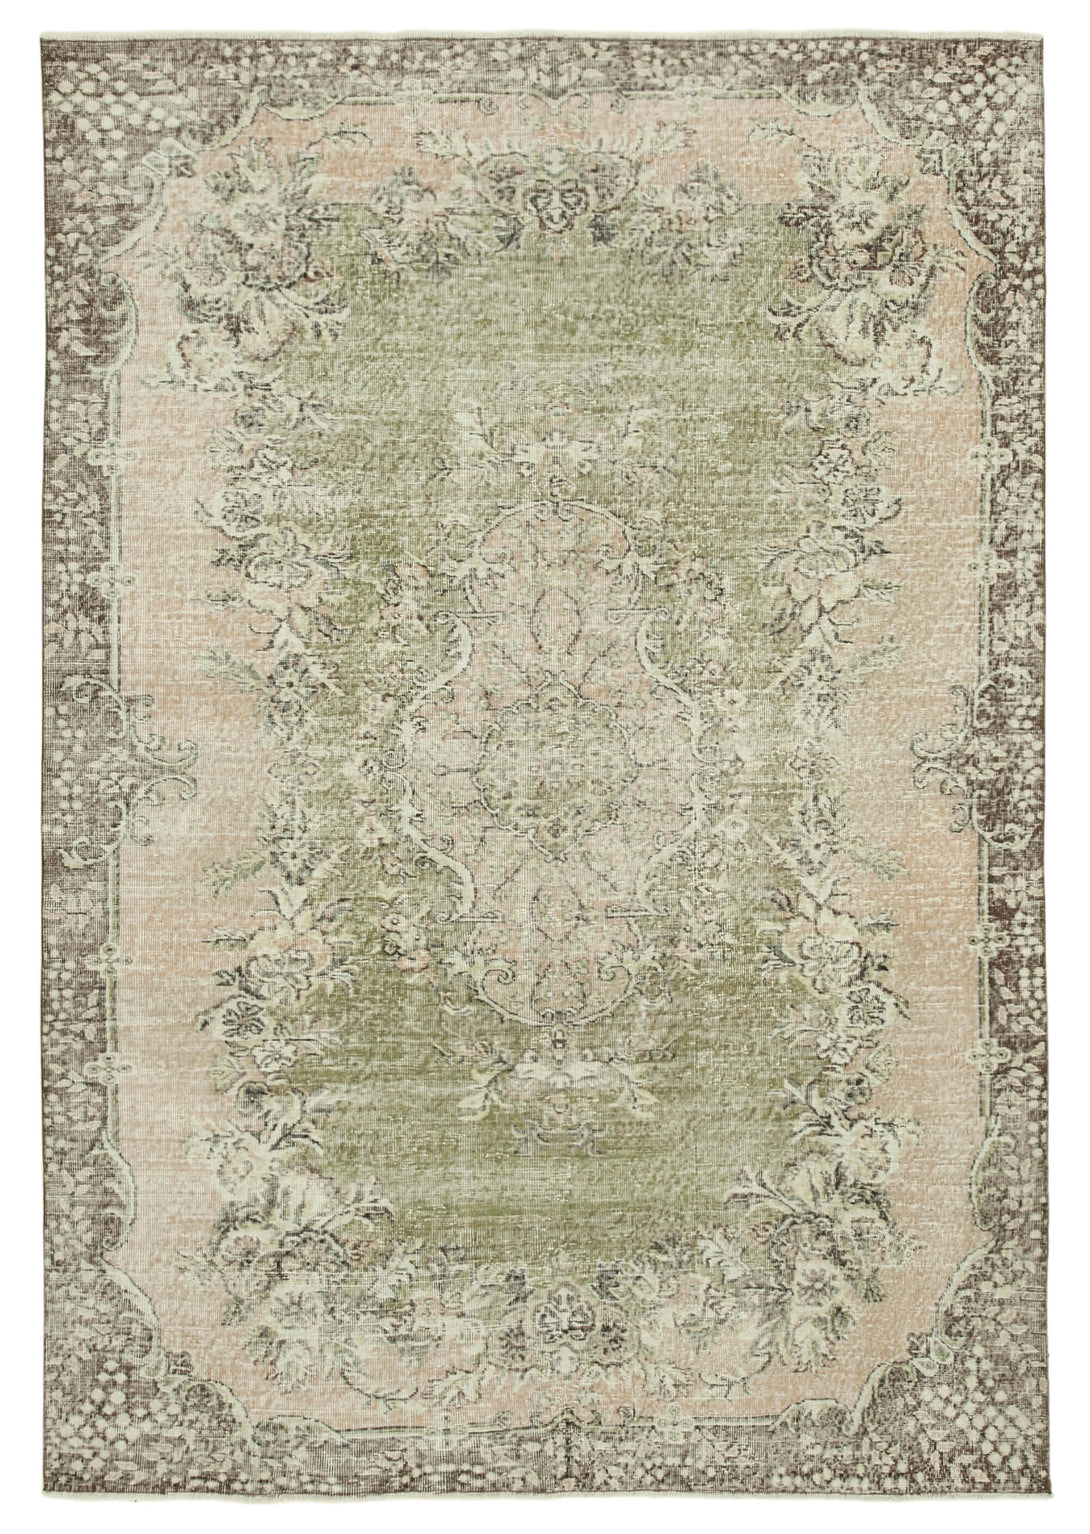 Handmade White Wash Area Rug > Design# OL-AC-36826 > Size: 6'-11" x 10'-2", Carpet Culture Rugs, Handmade Rugs, NYC Rugs, New Rugs, Shop Rugs, Rug Store, Outlet Rugs, SoHo Rugs, Rugs in USA